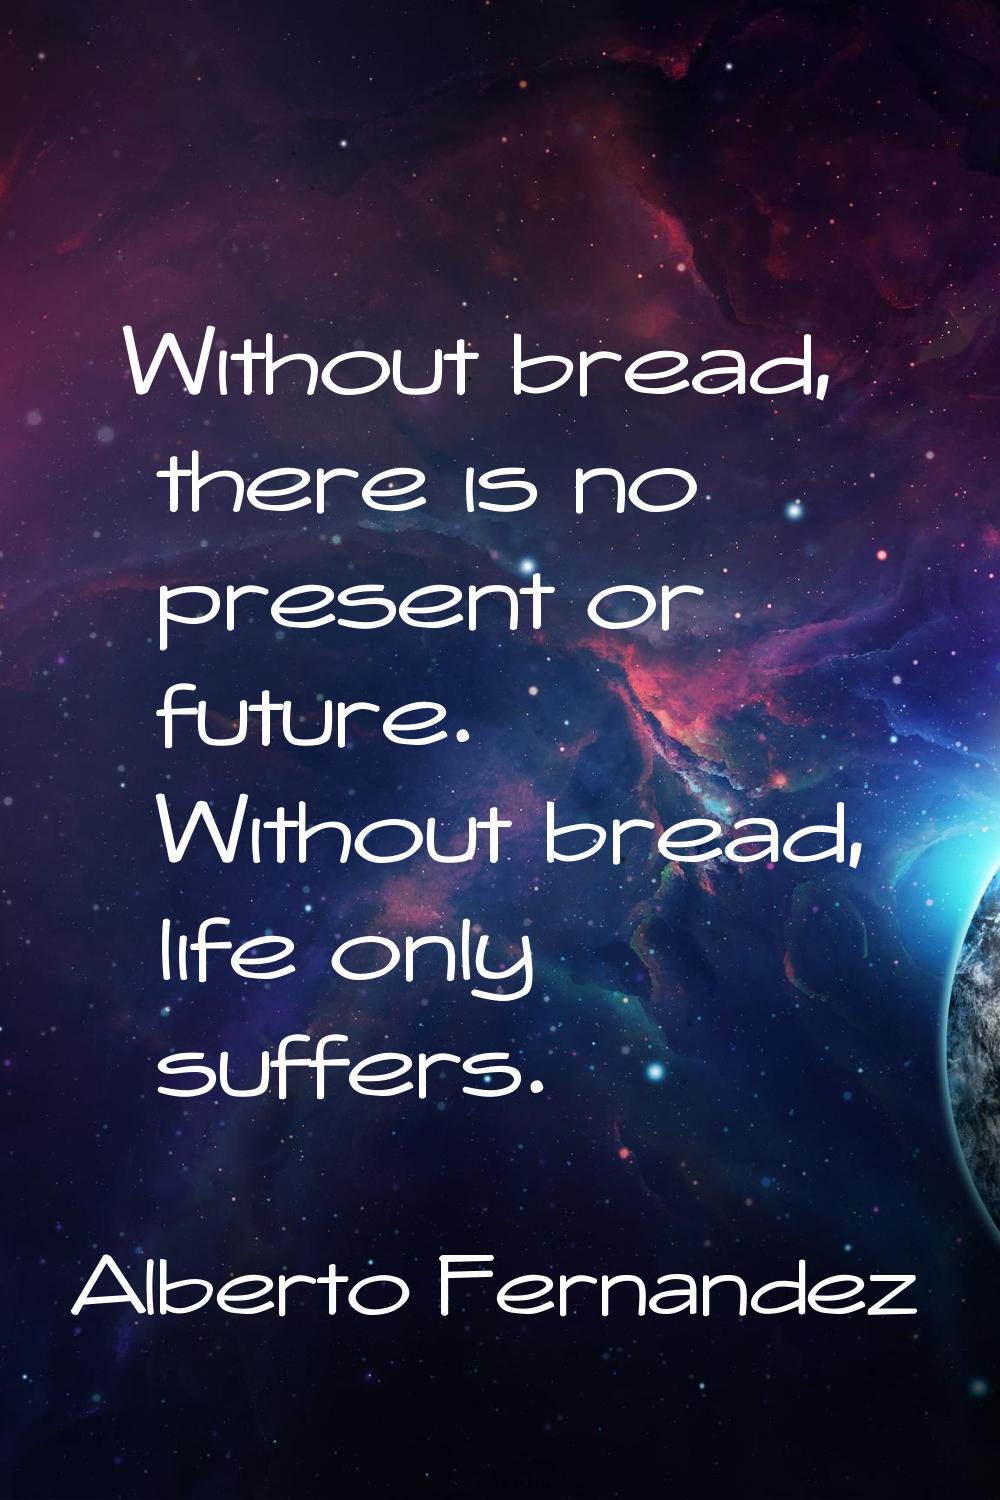 Without bread, there is no present or future. Without bread, life only suffers.